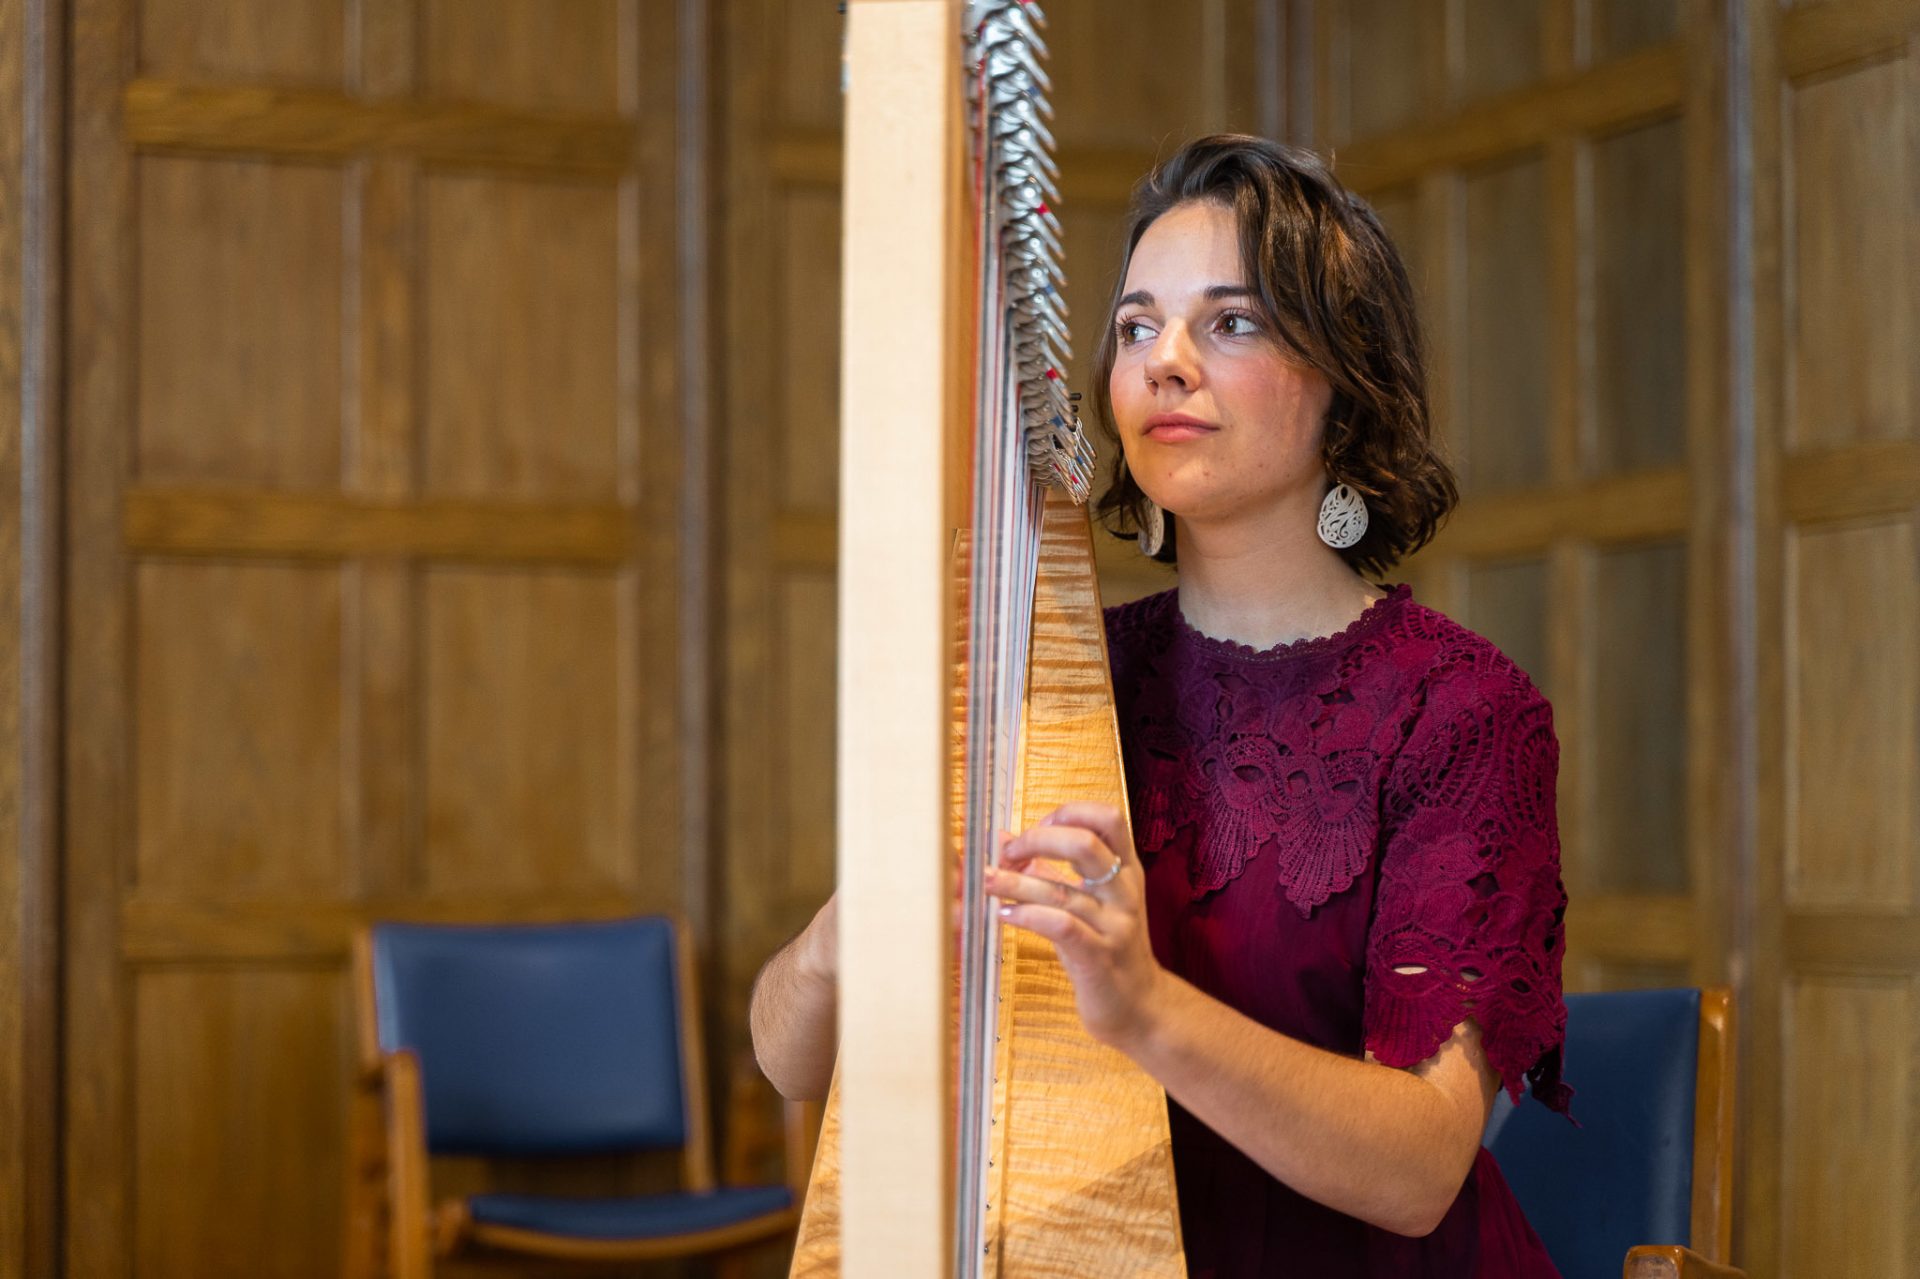 A harpist playing her harp